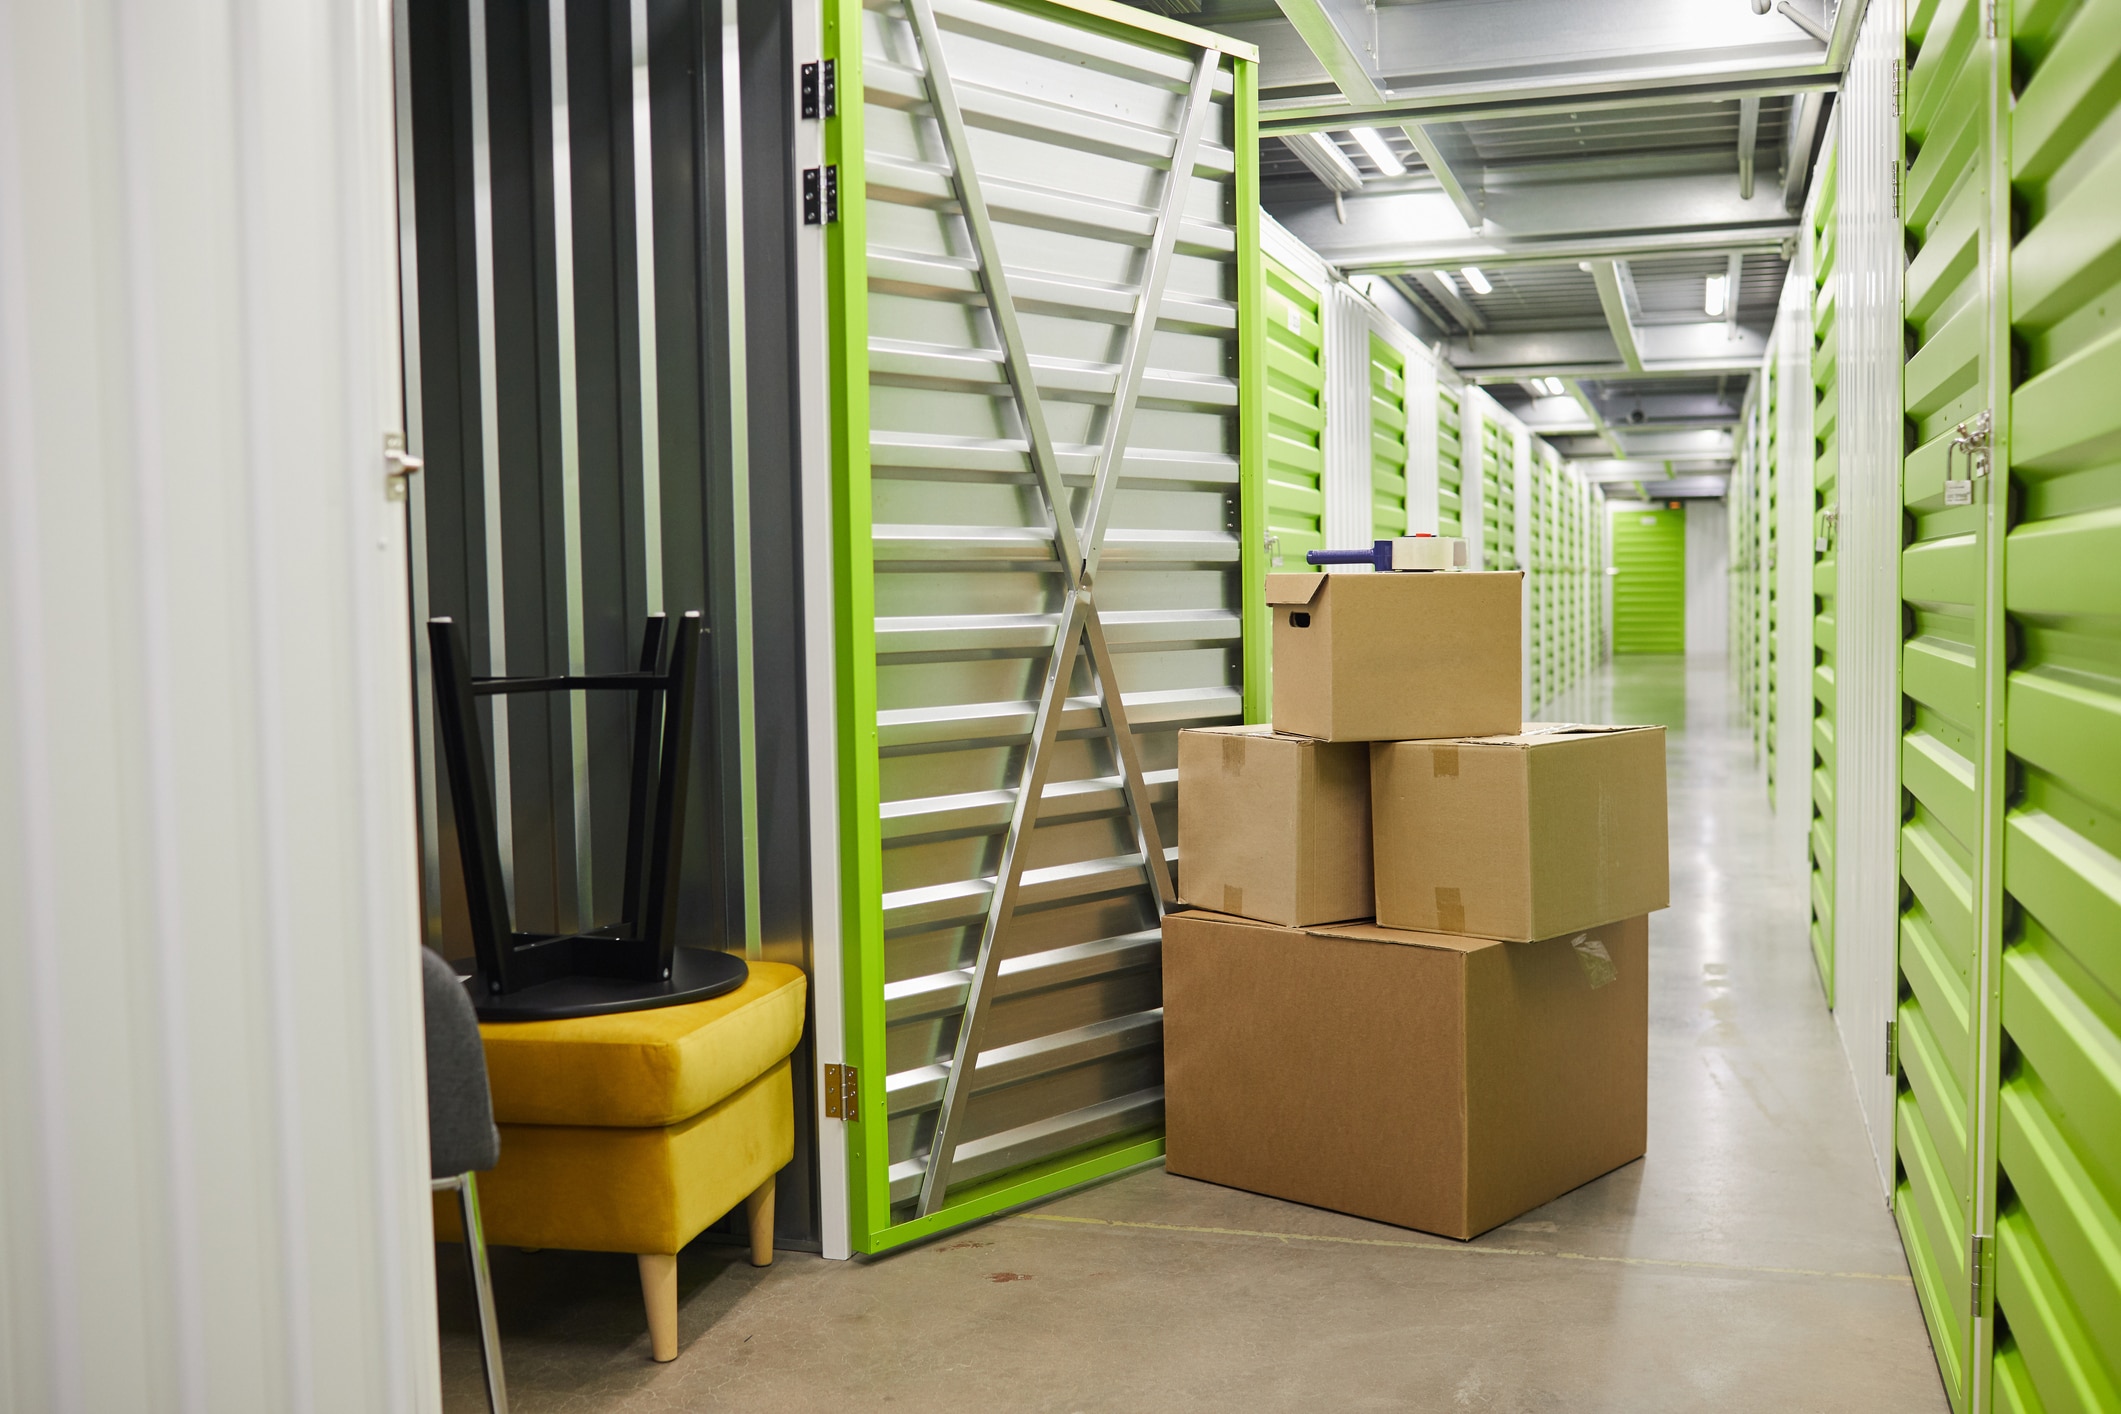 A good removalist and storage facility offers various storage management solutions